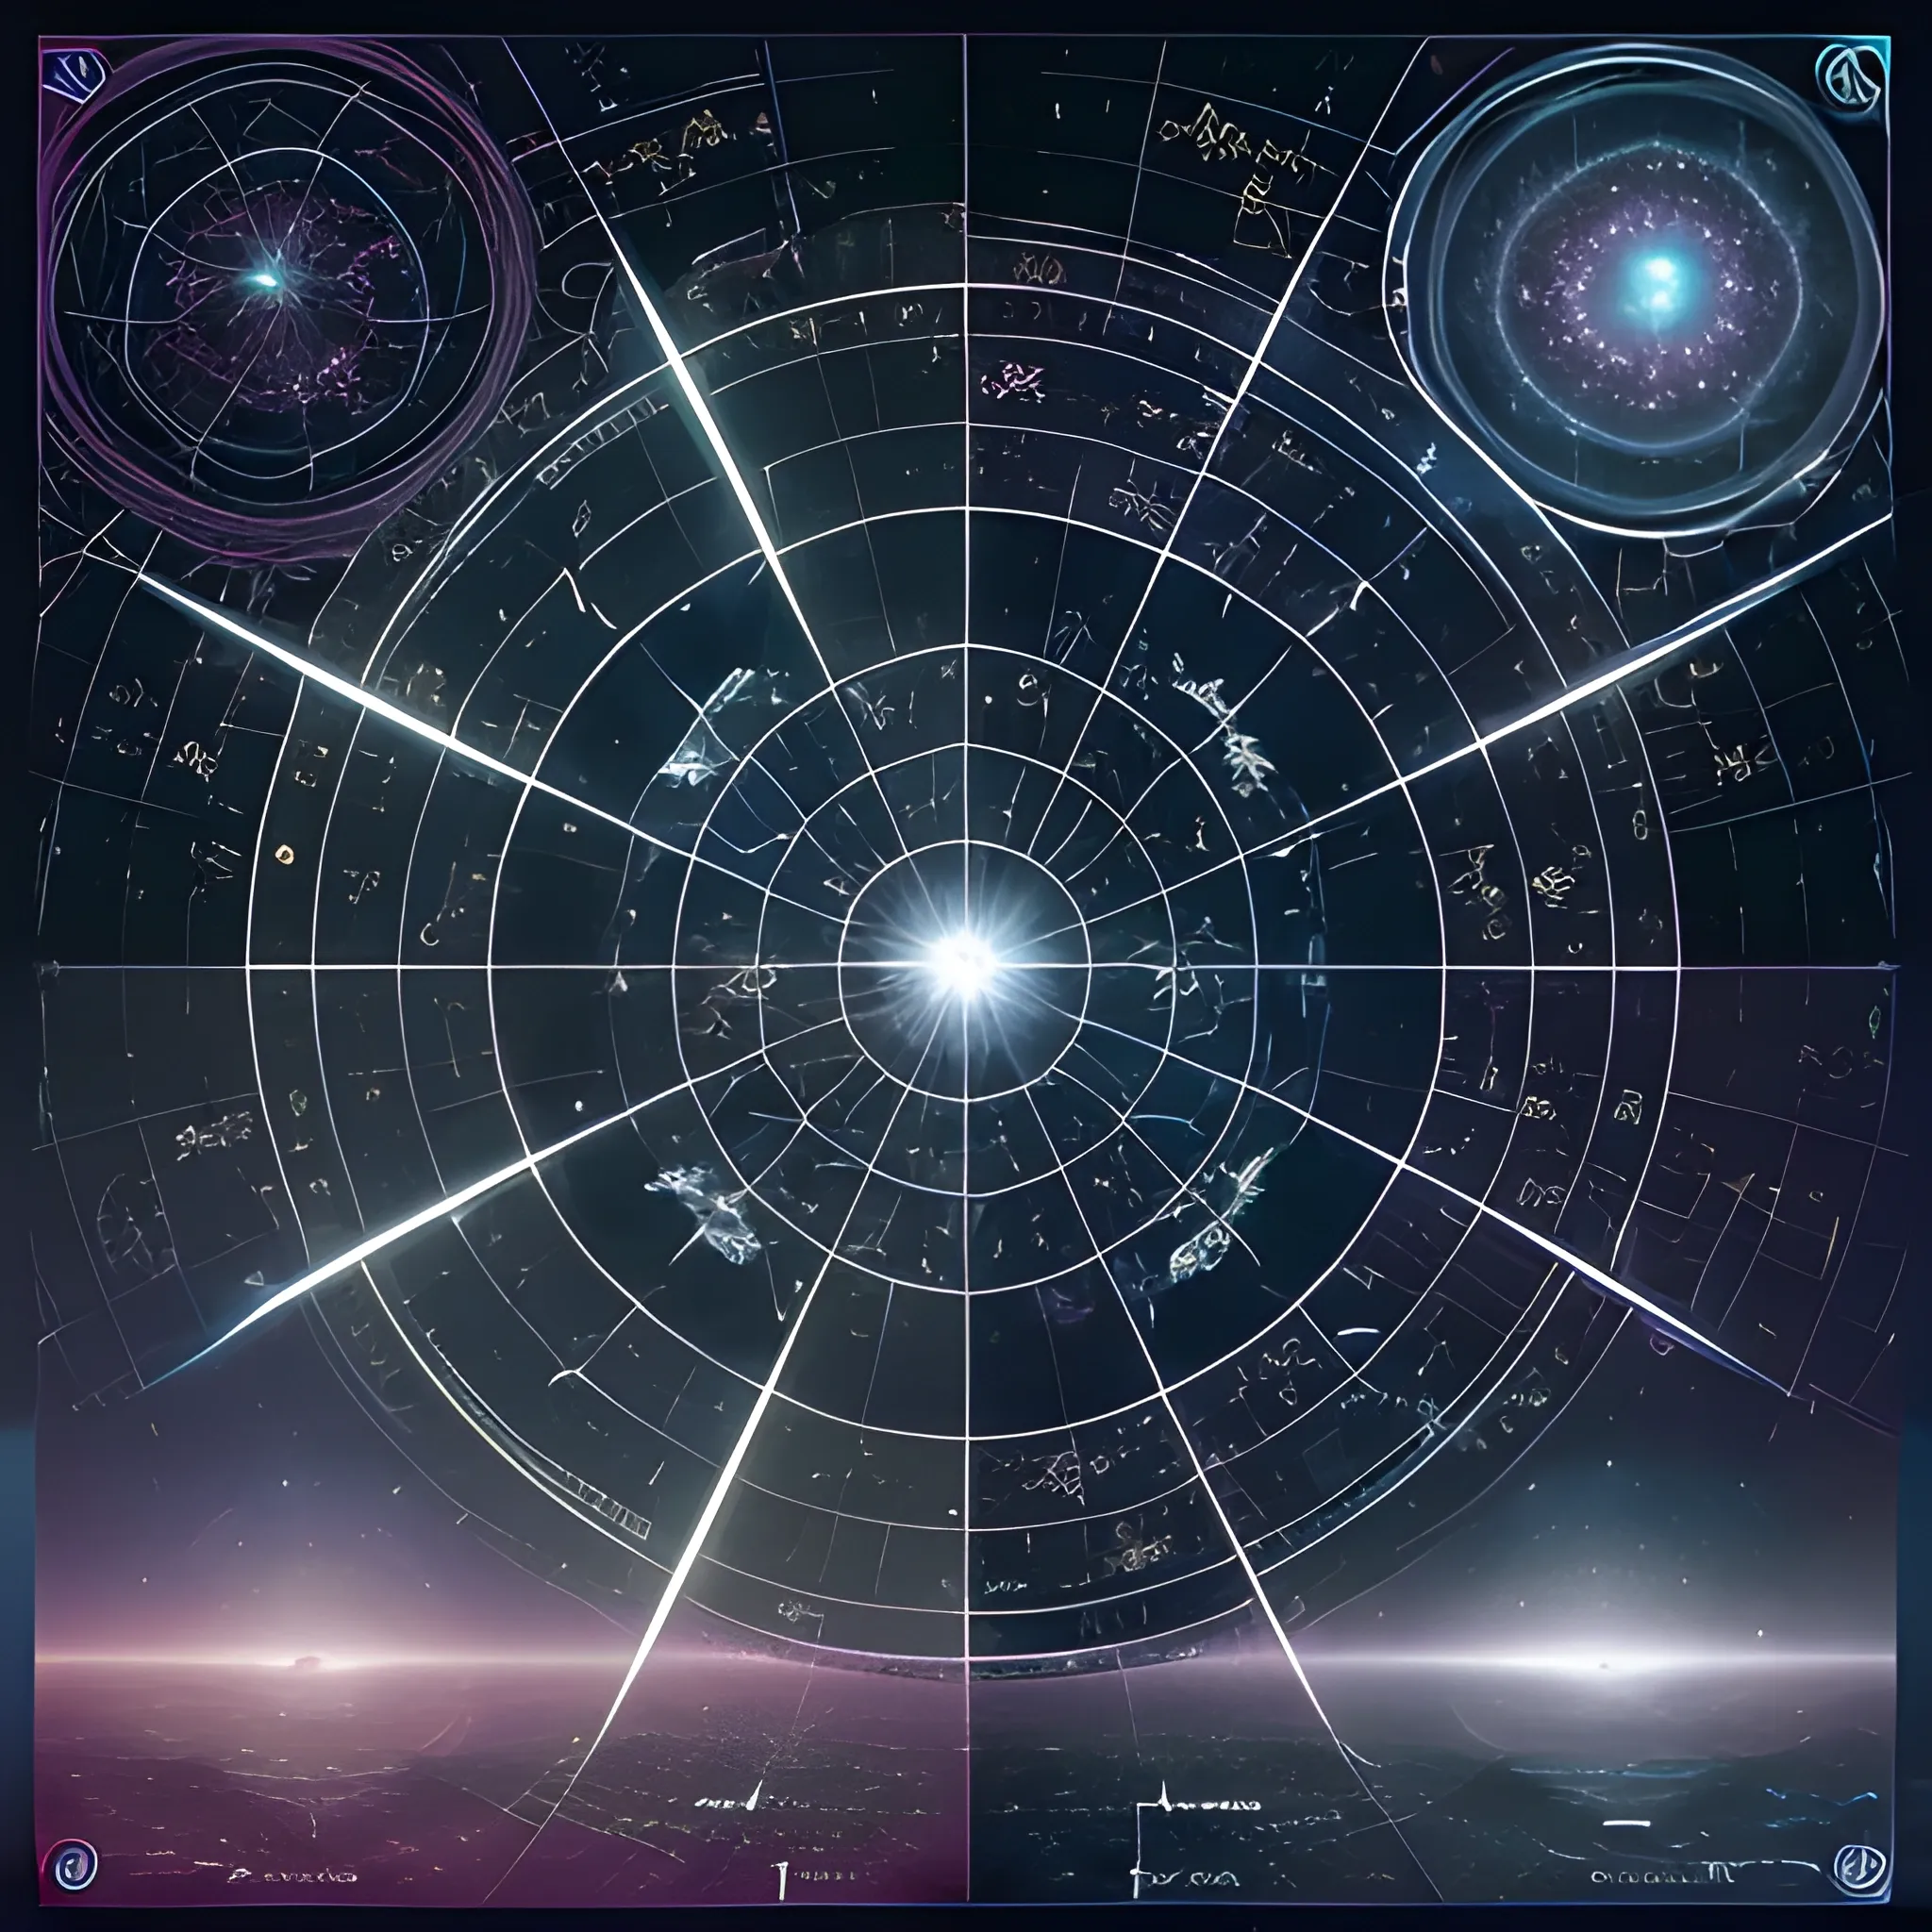 "Ancient Star Map, Galactic Intersection, Destiny Crossroads","Mystical Glow, Celestial Eye in the Sky","Cinematic, Sci-Fi","3D","width": 960, "height": 540, "seed": "566136464", "step": "60", "version": "SH_Deliberate"